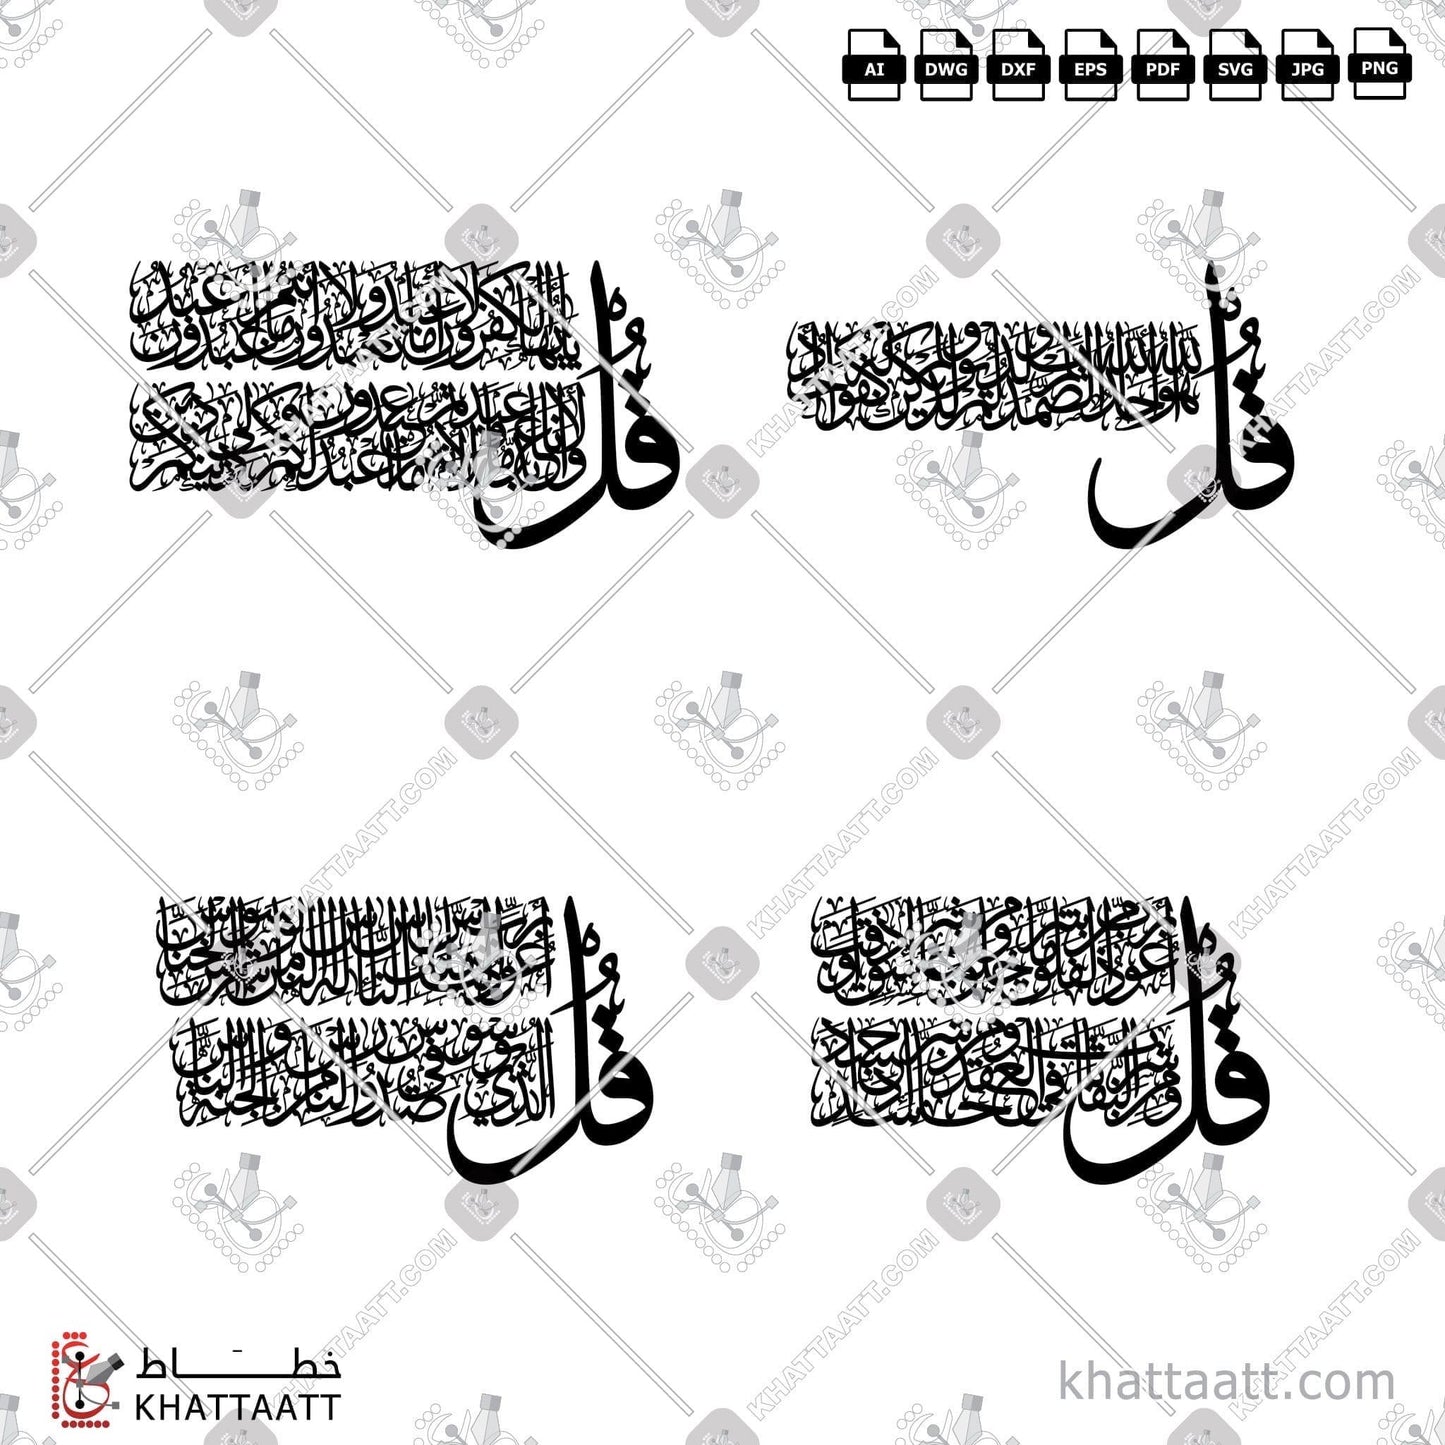 Download Arabic Calligraphy of The 4 Quls - القلاقل الأربعة in Thuluth - خط الثلث in vector and .png